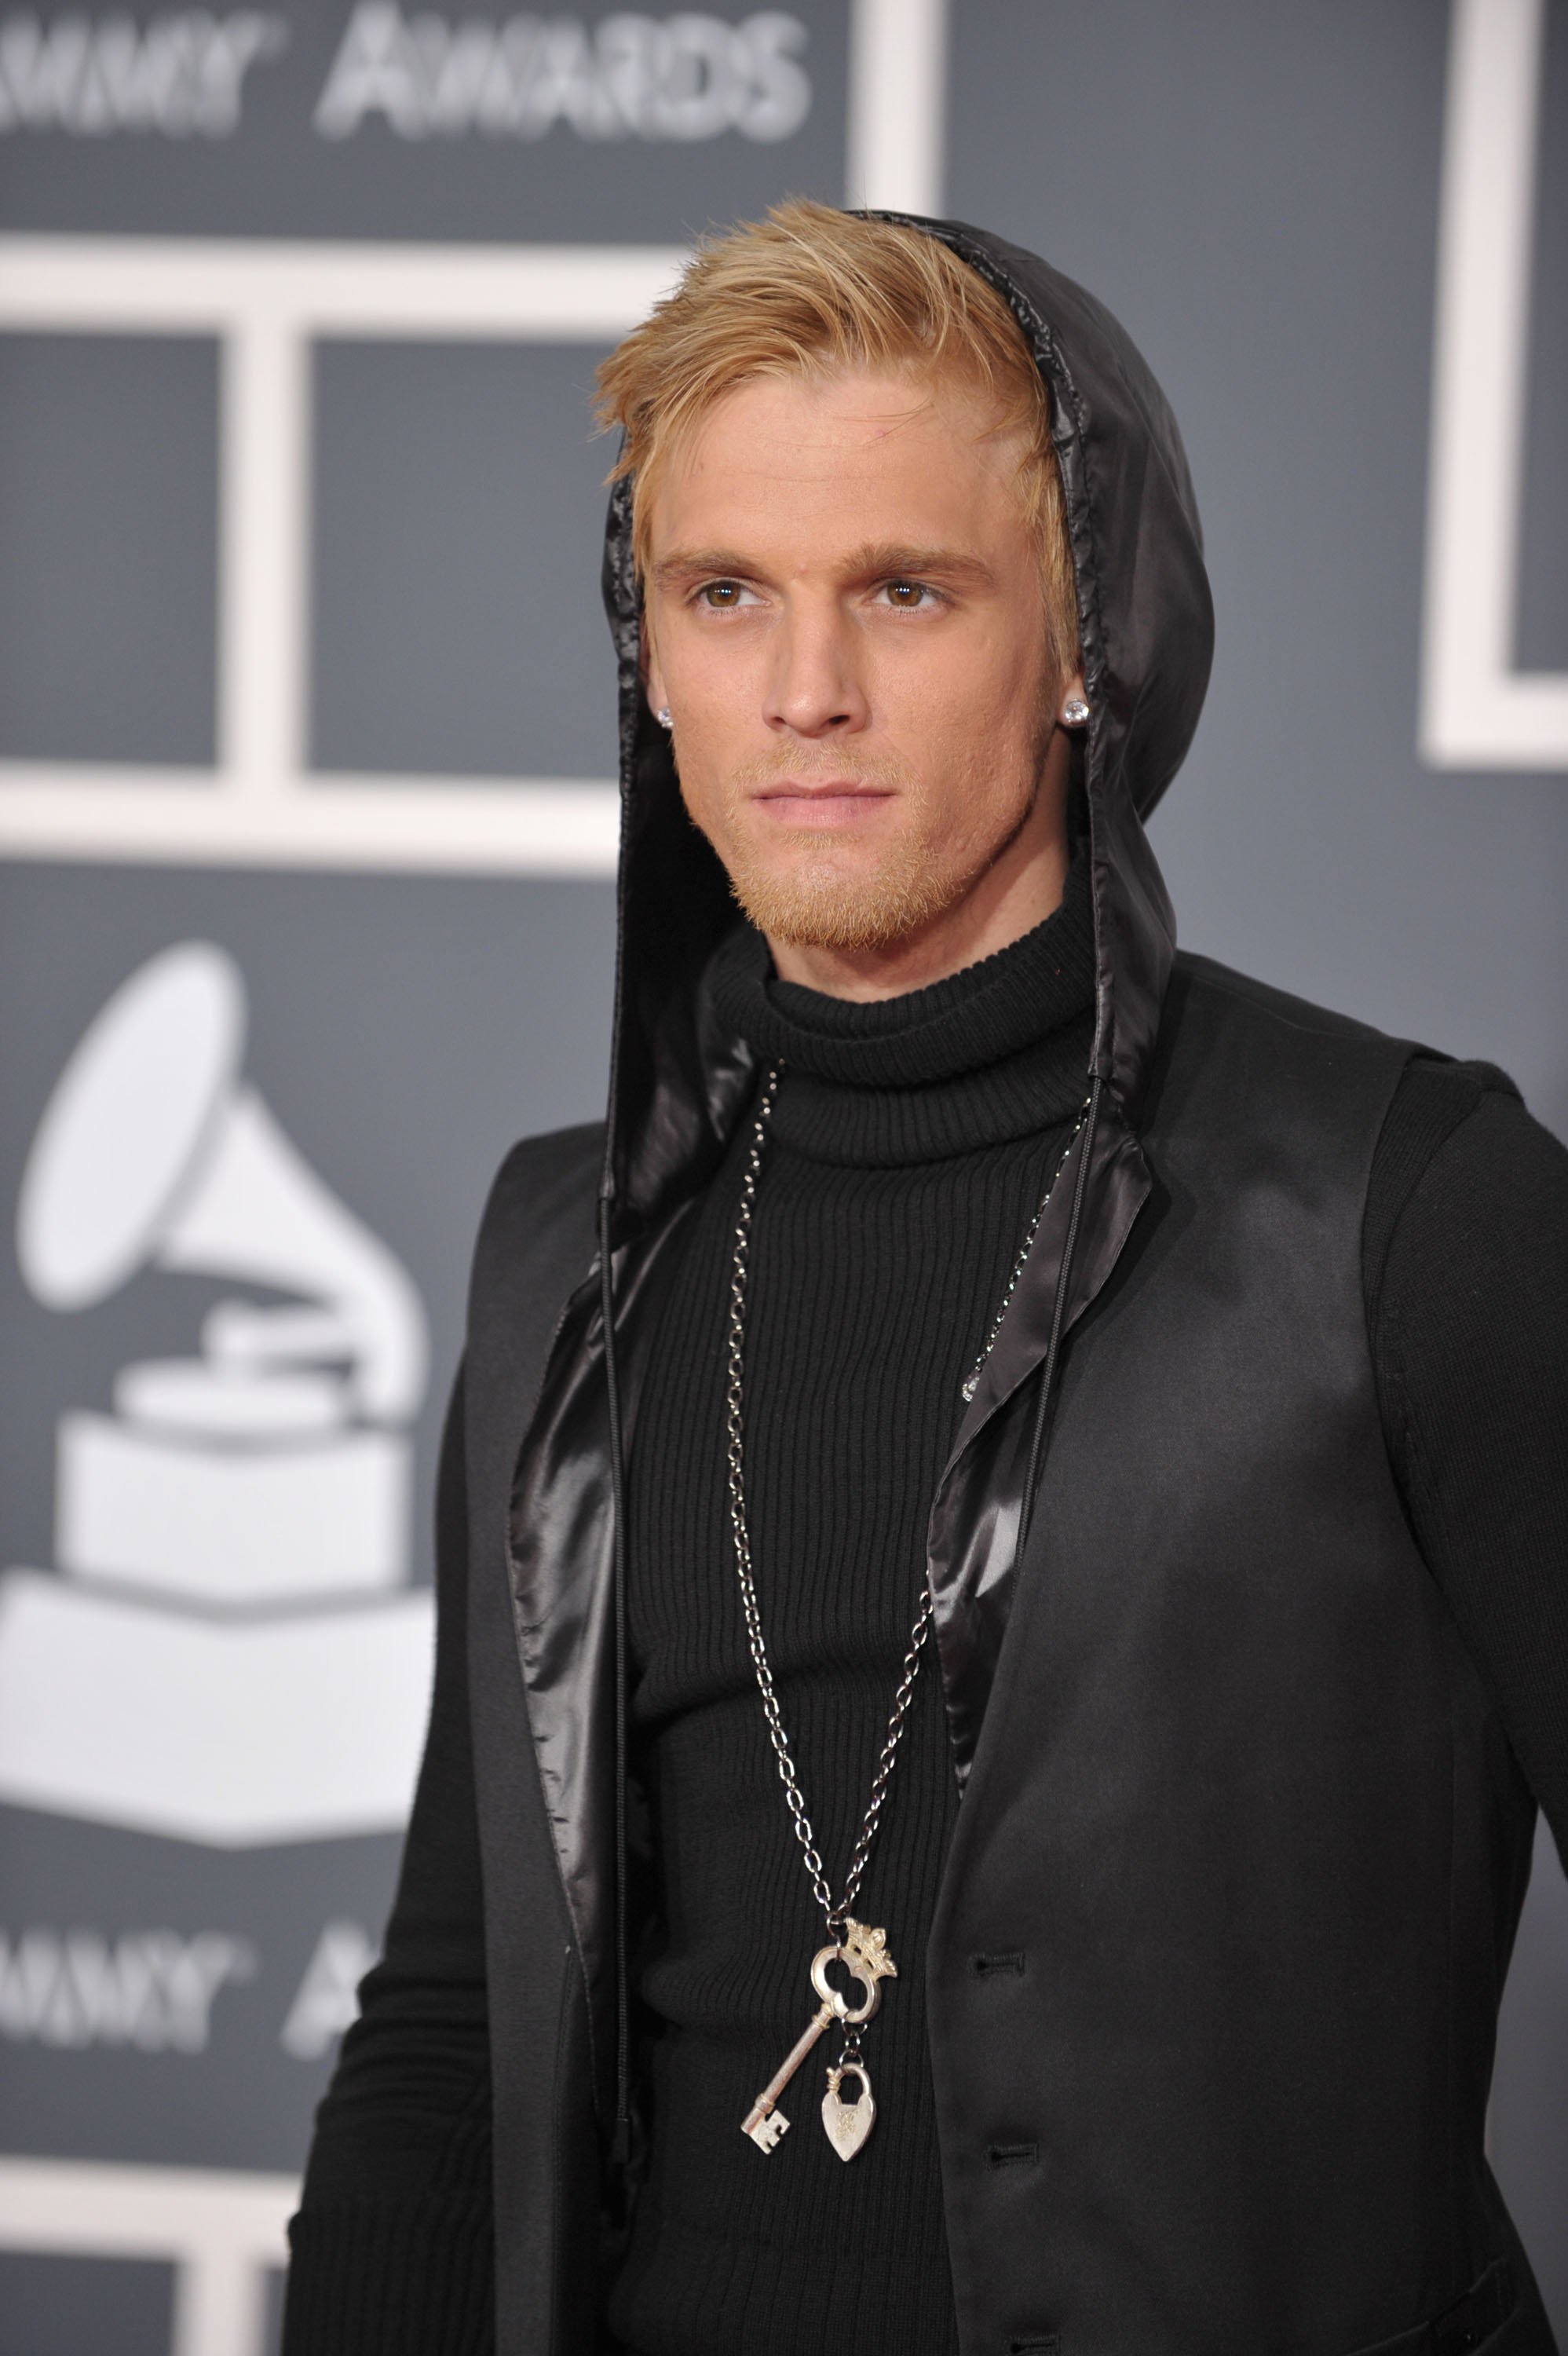 Aaron Carter's Controversial Career and Unexpected Engagement after Breakup